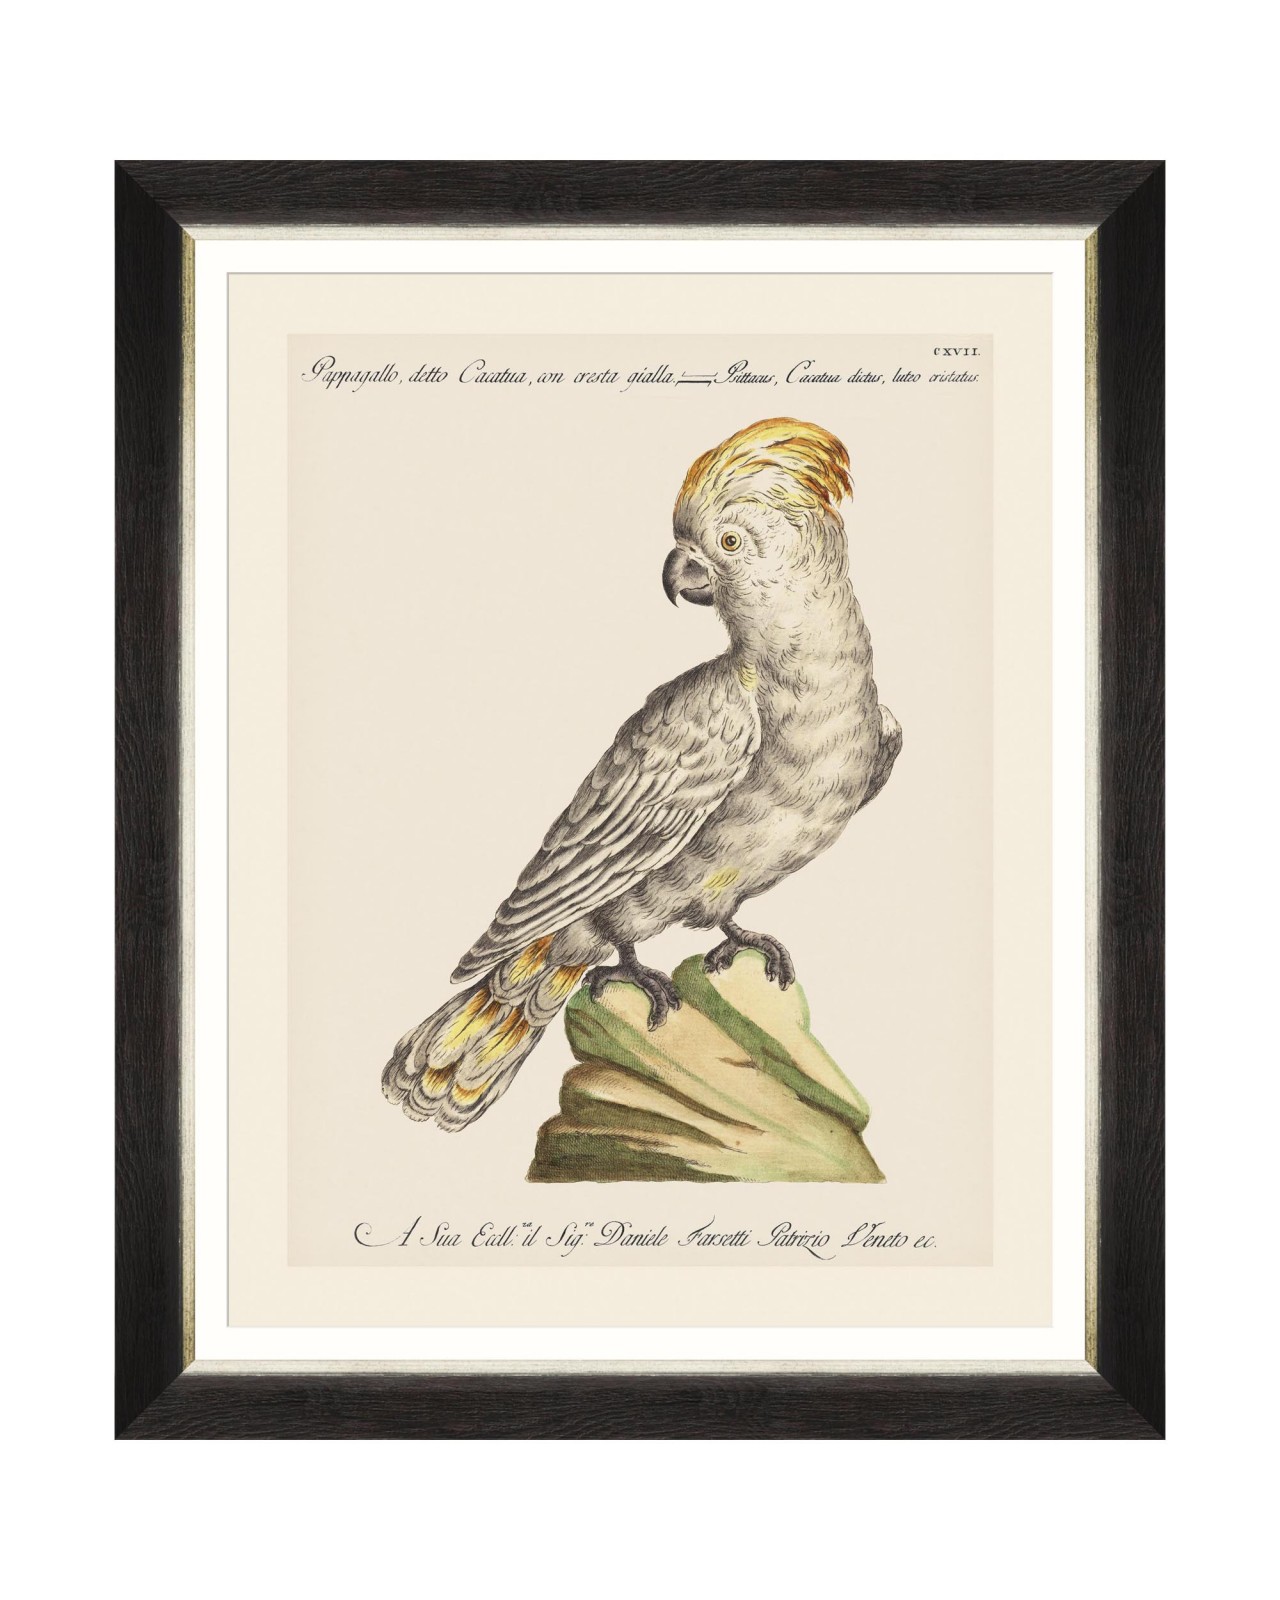 images/productimages/small/parrots-of-brasil-iii-framed-art-40x50cm-fa13213.jpg